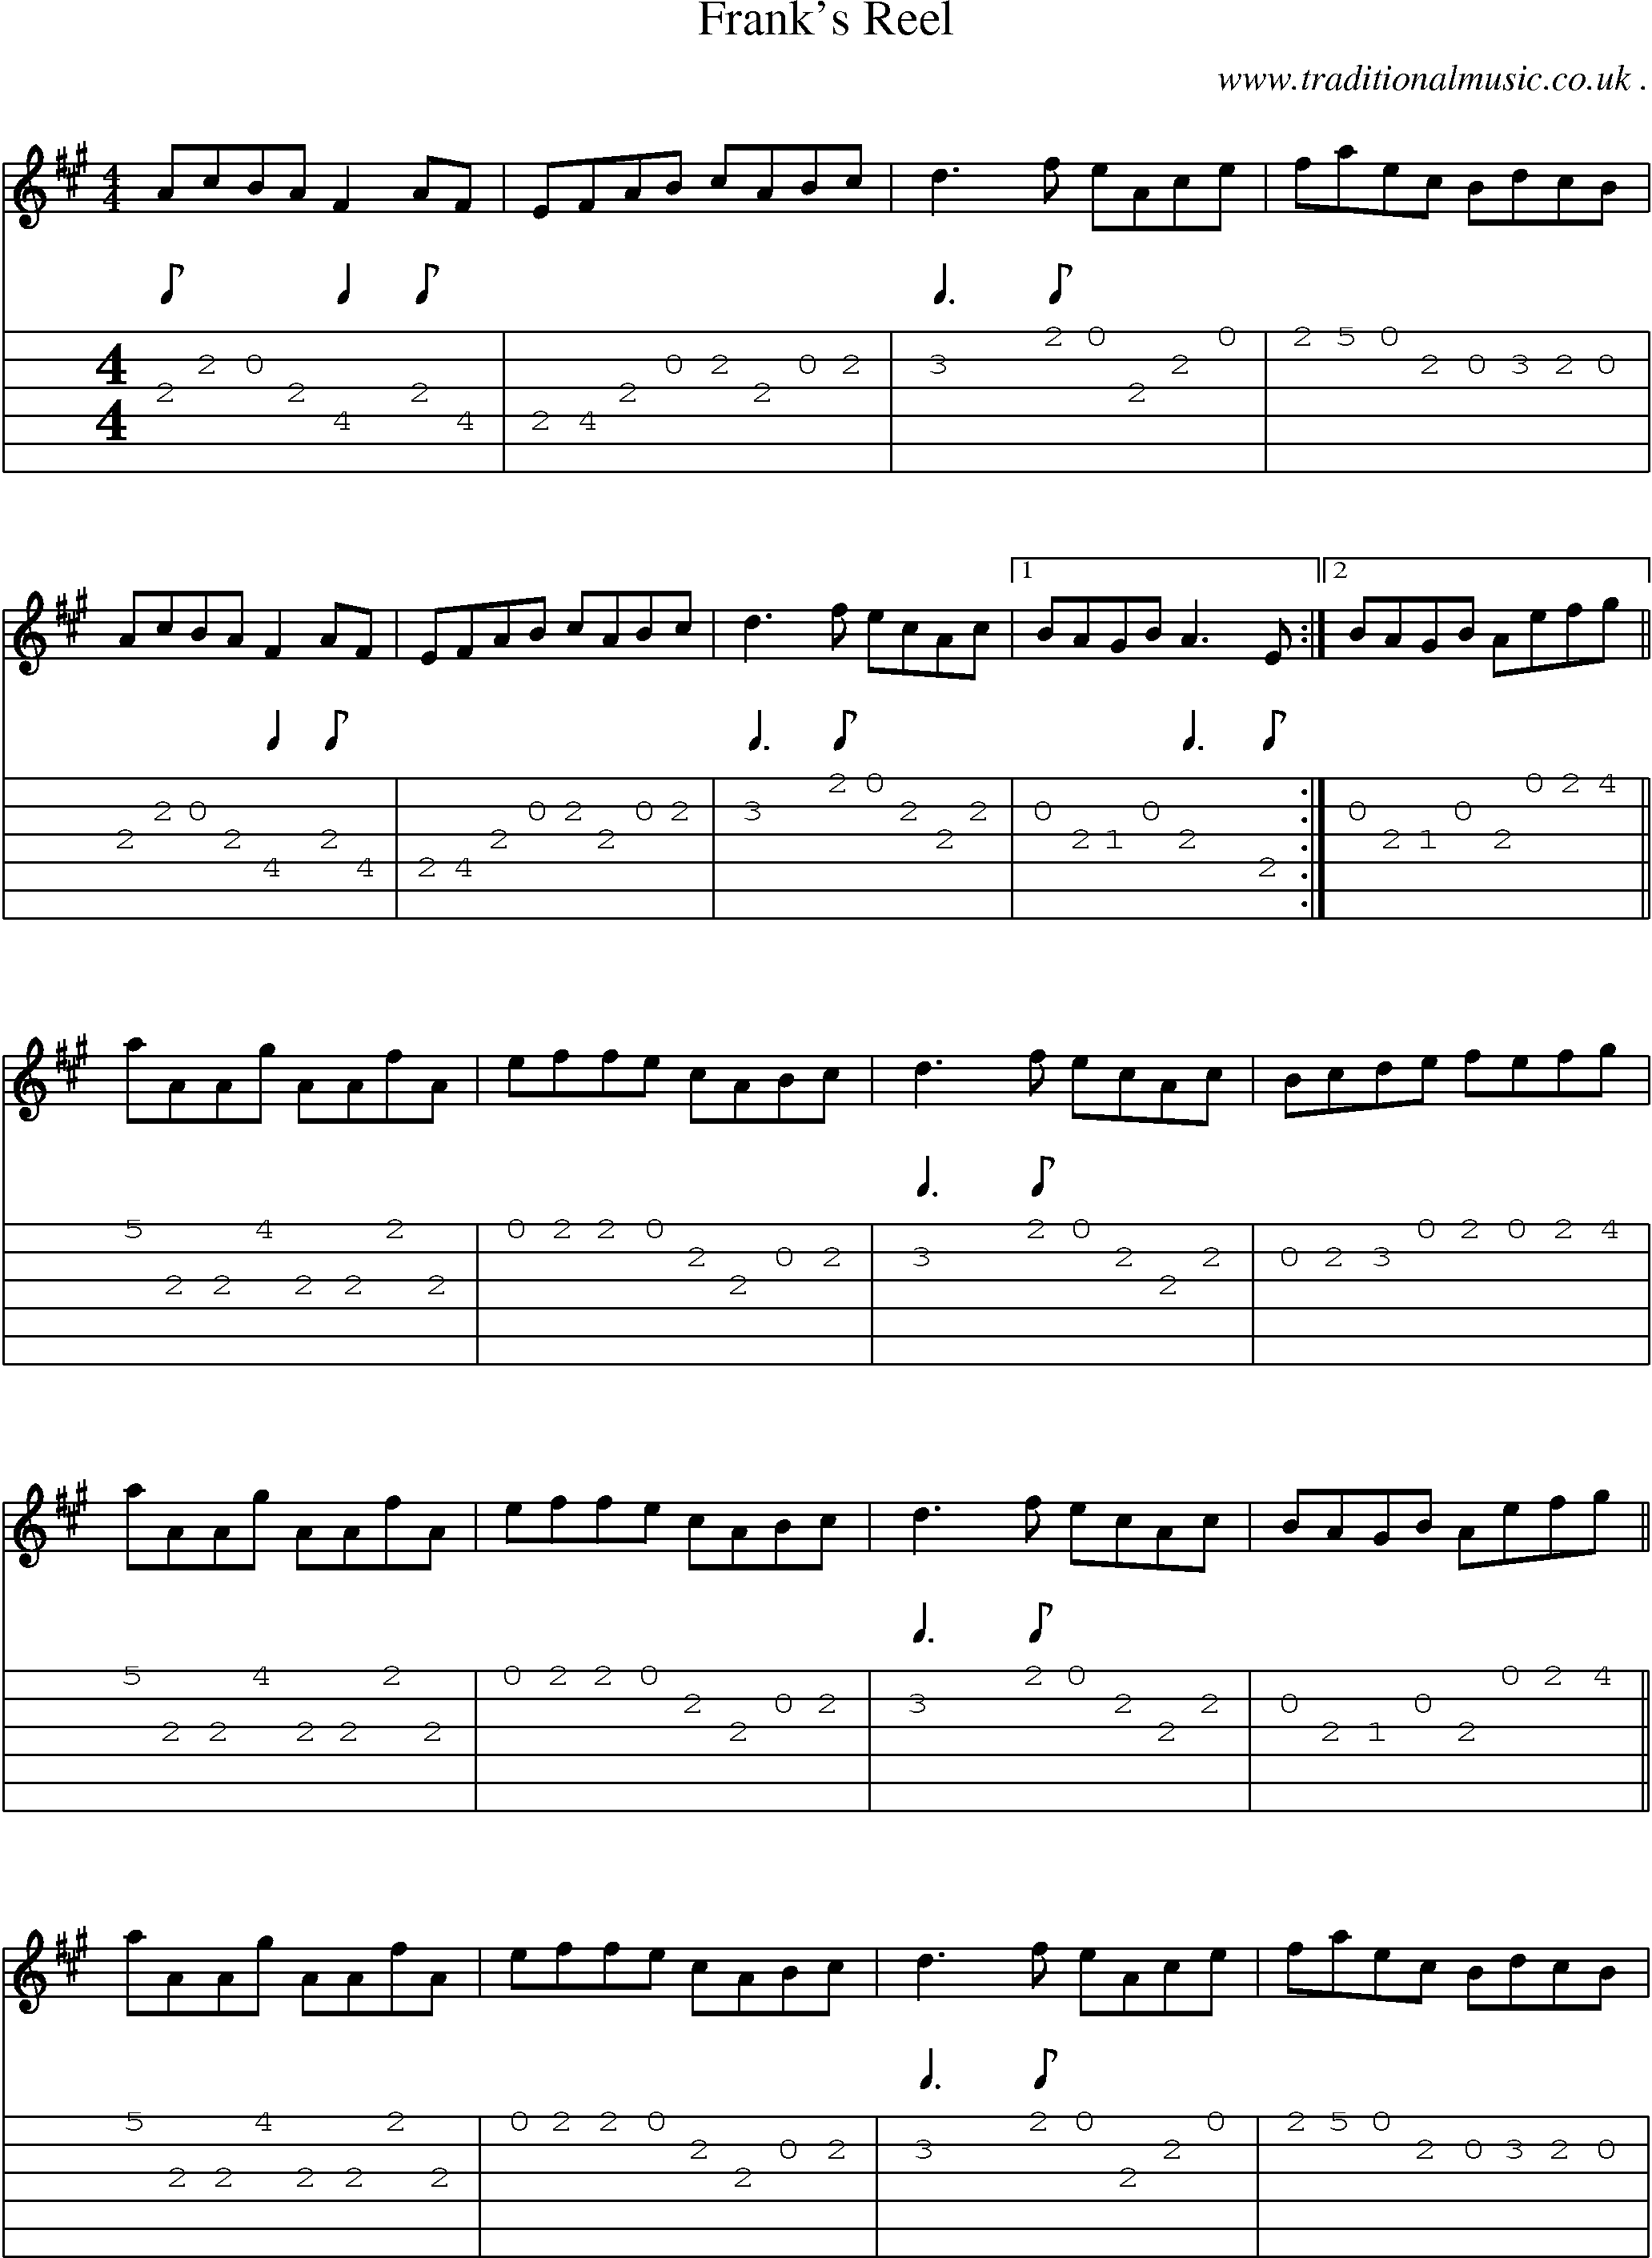 Sheet-Music and Guitar Tabs for Franks Reel